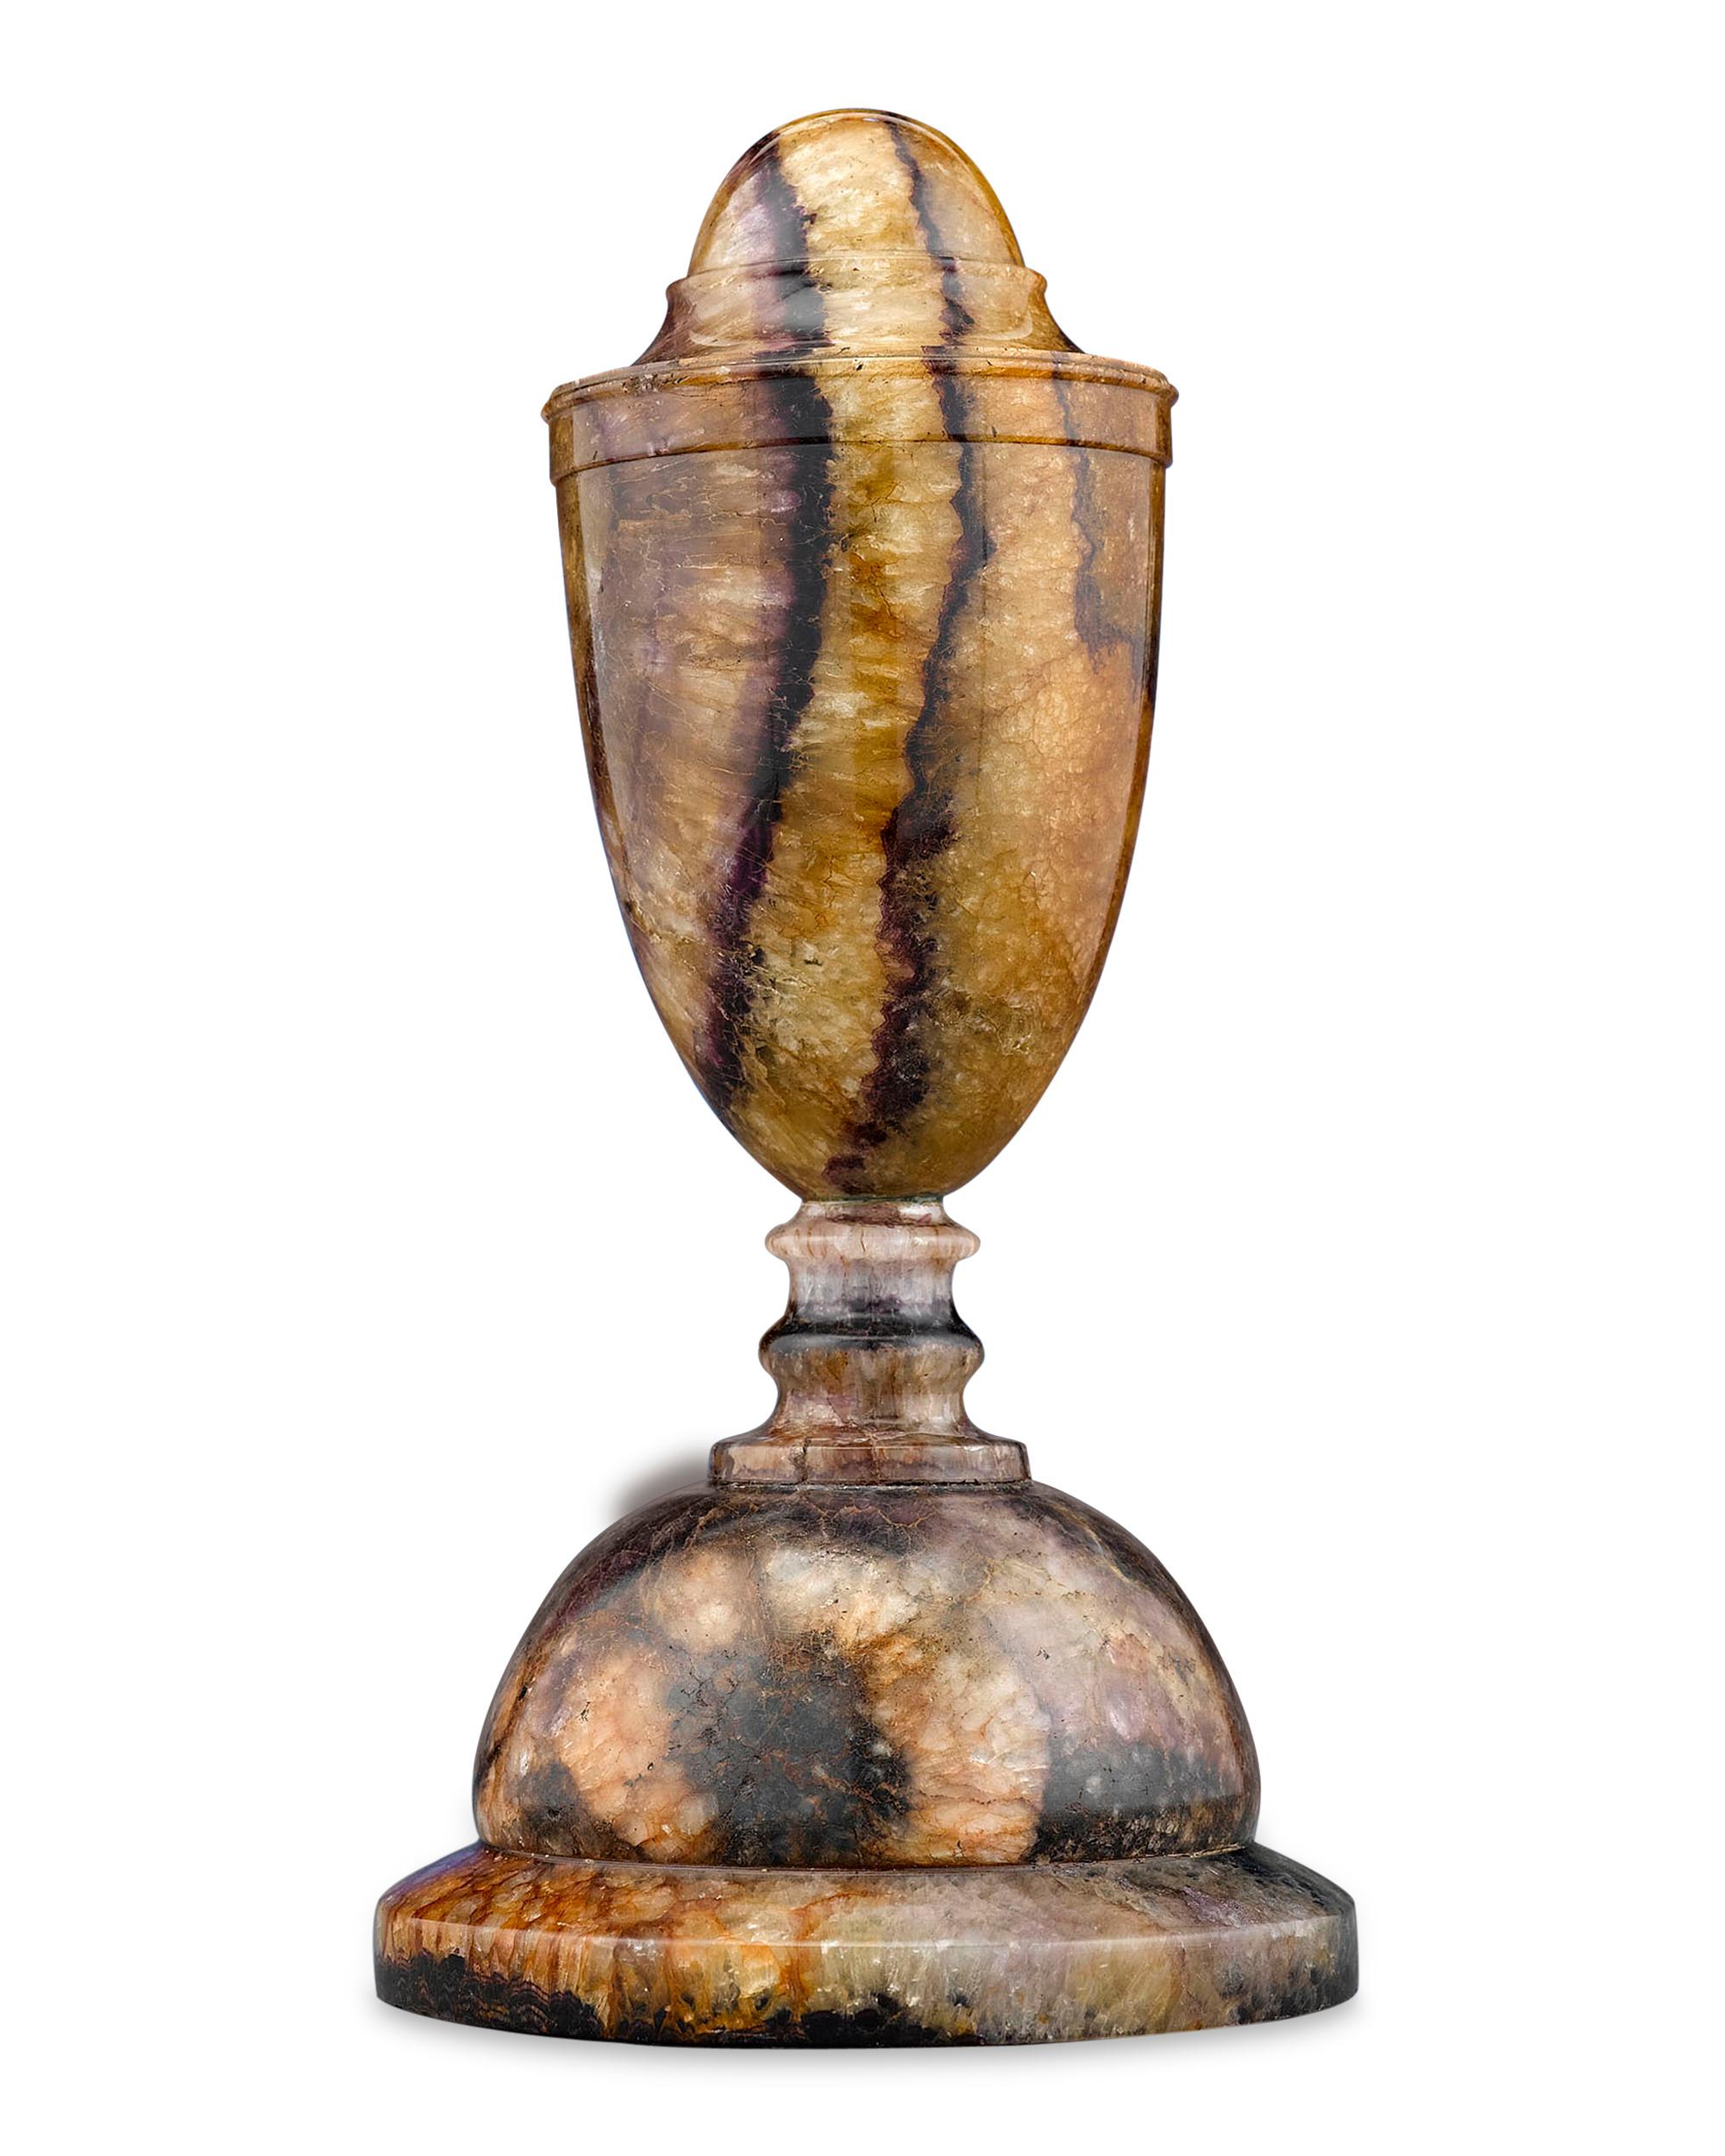 This beautiful ornamental urn is carved of rare Blue John Derbyshire spar, taken from the now-extinct Blue John Cavern in Derbyshire, England. Crafted in a classically-inspired shape, this closed urn evokes the elegance of the Georgian period. Since